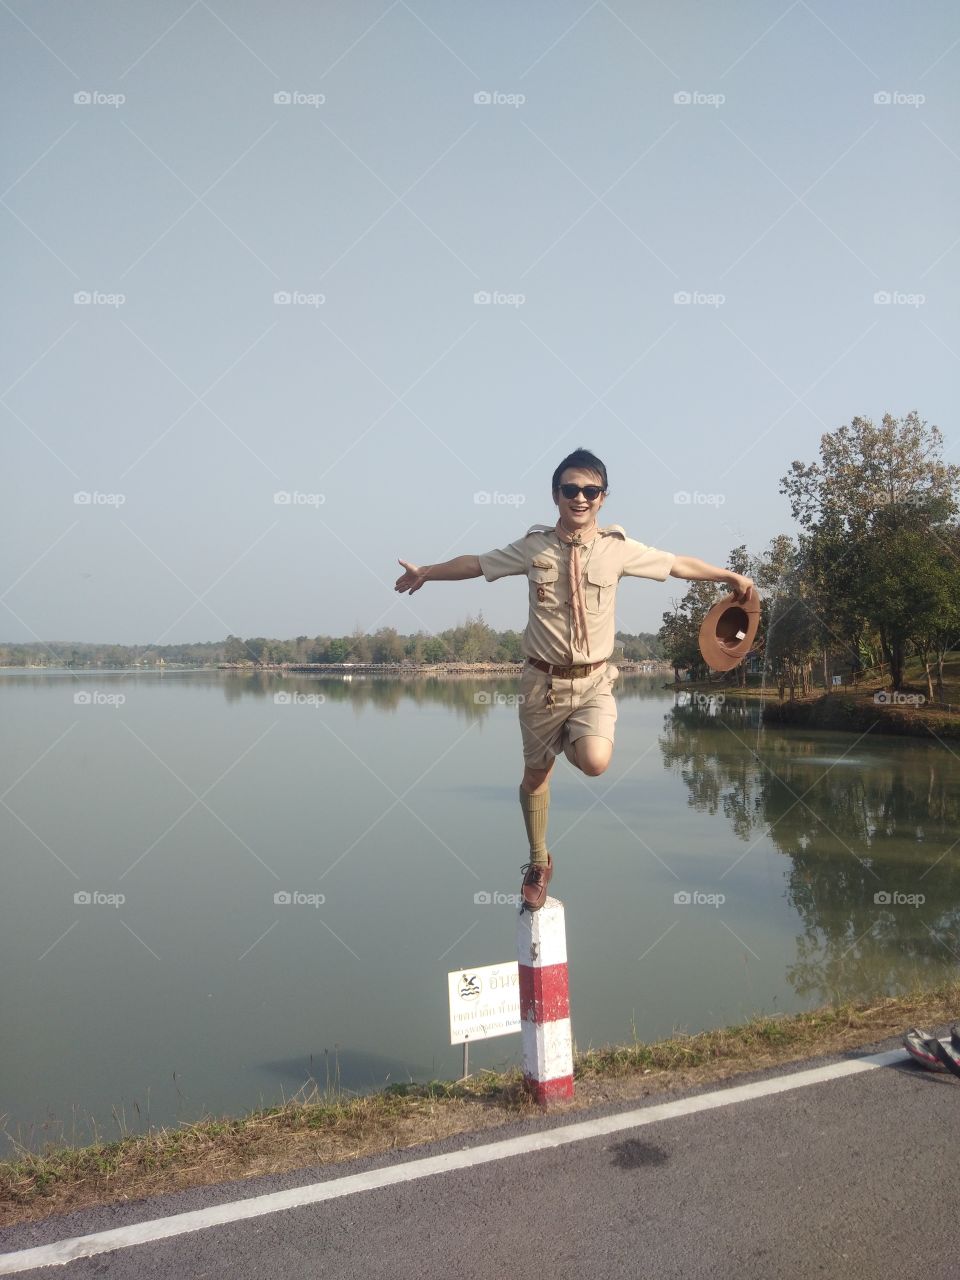 A Man wear scout suits, standing balance with one leg on top of concrete pillars along the reservoir